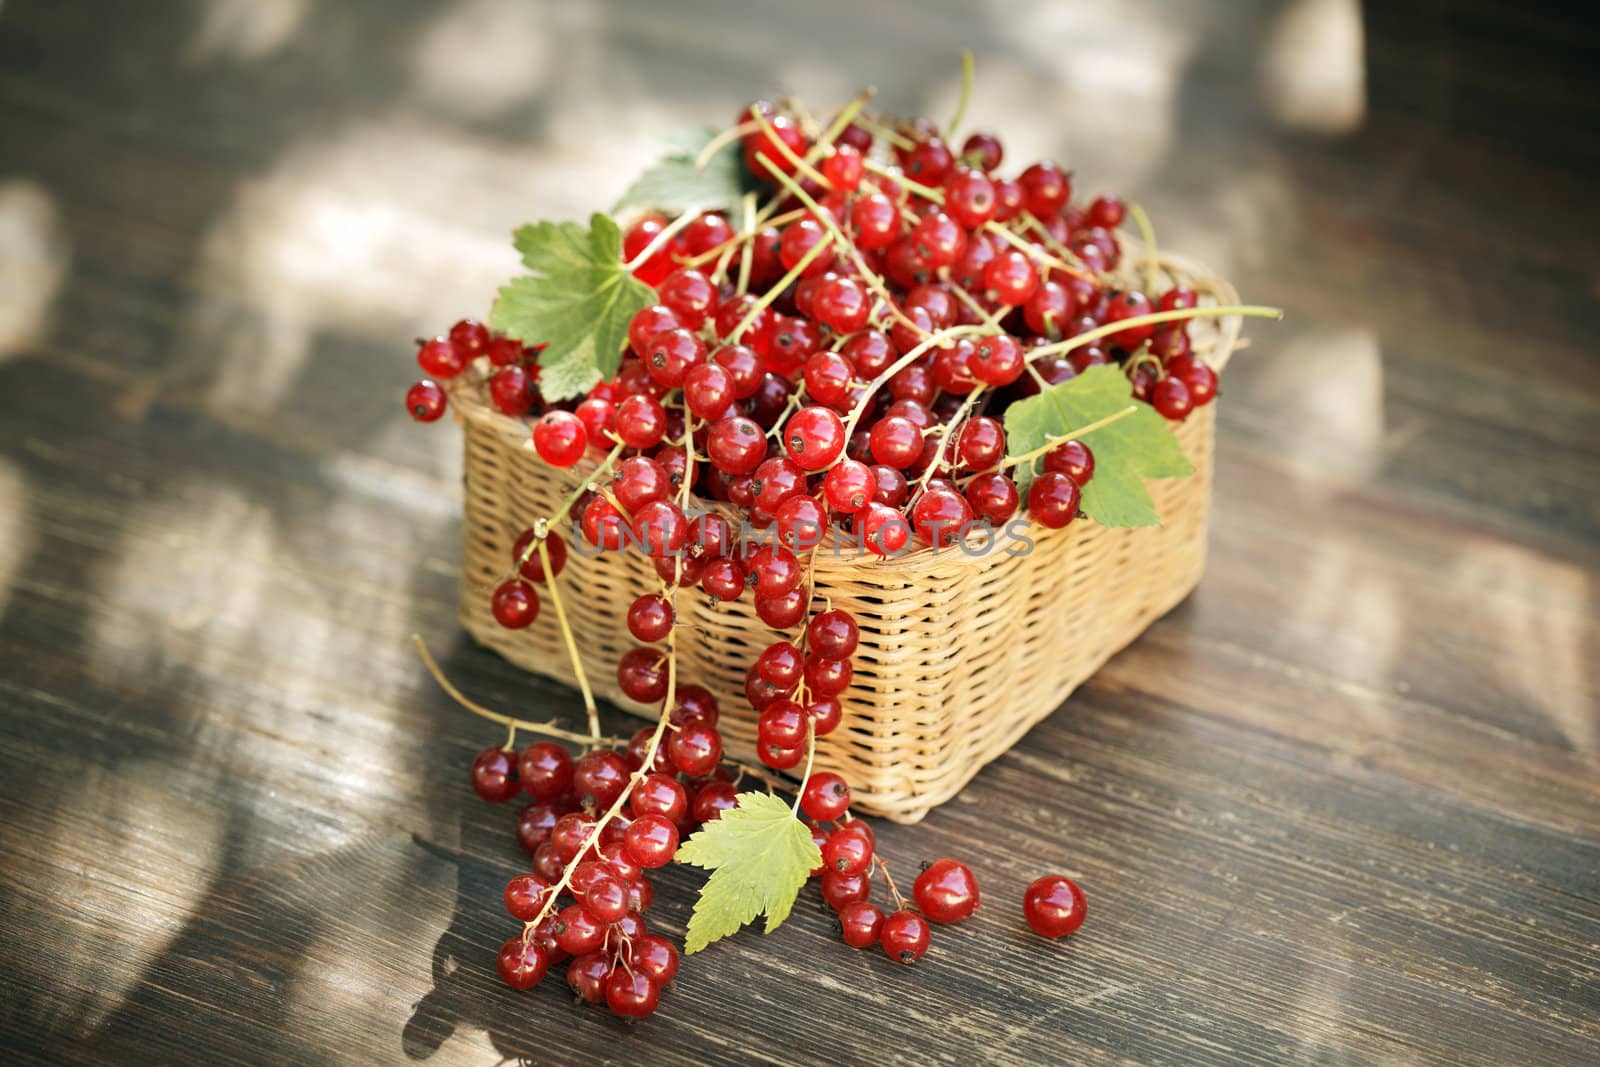 Red currant by Stocksnapper